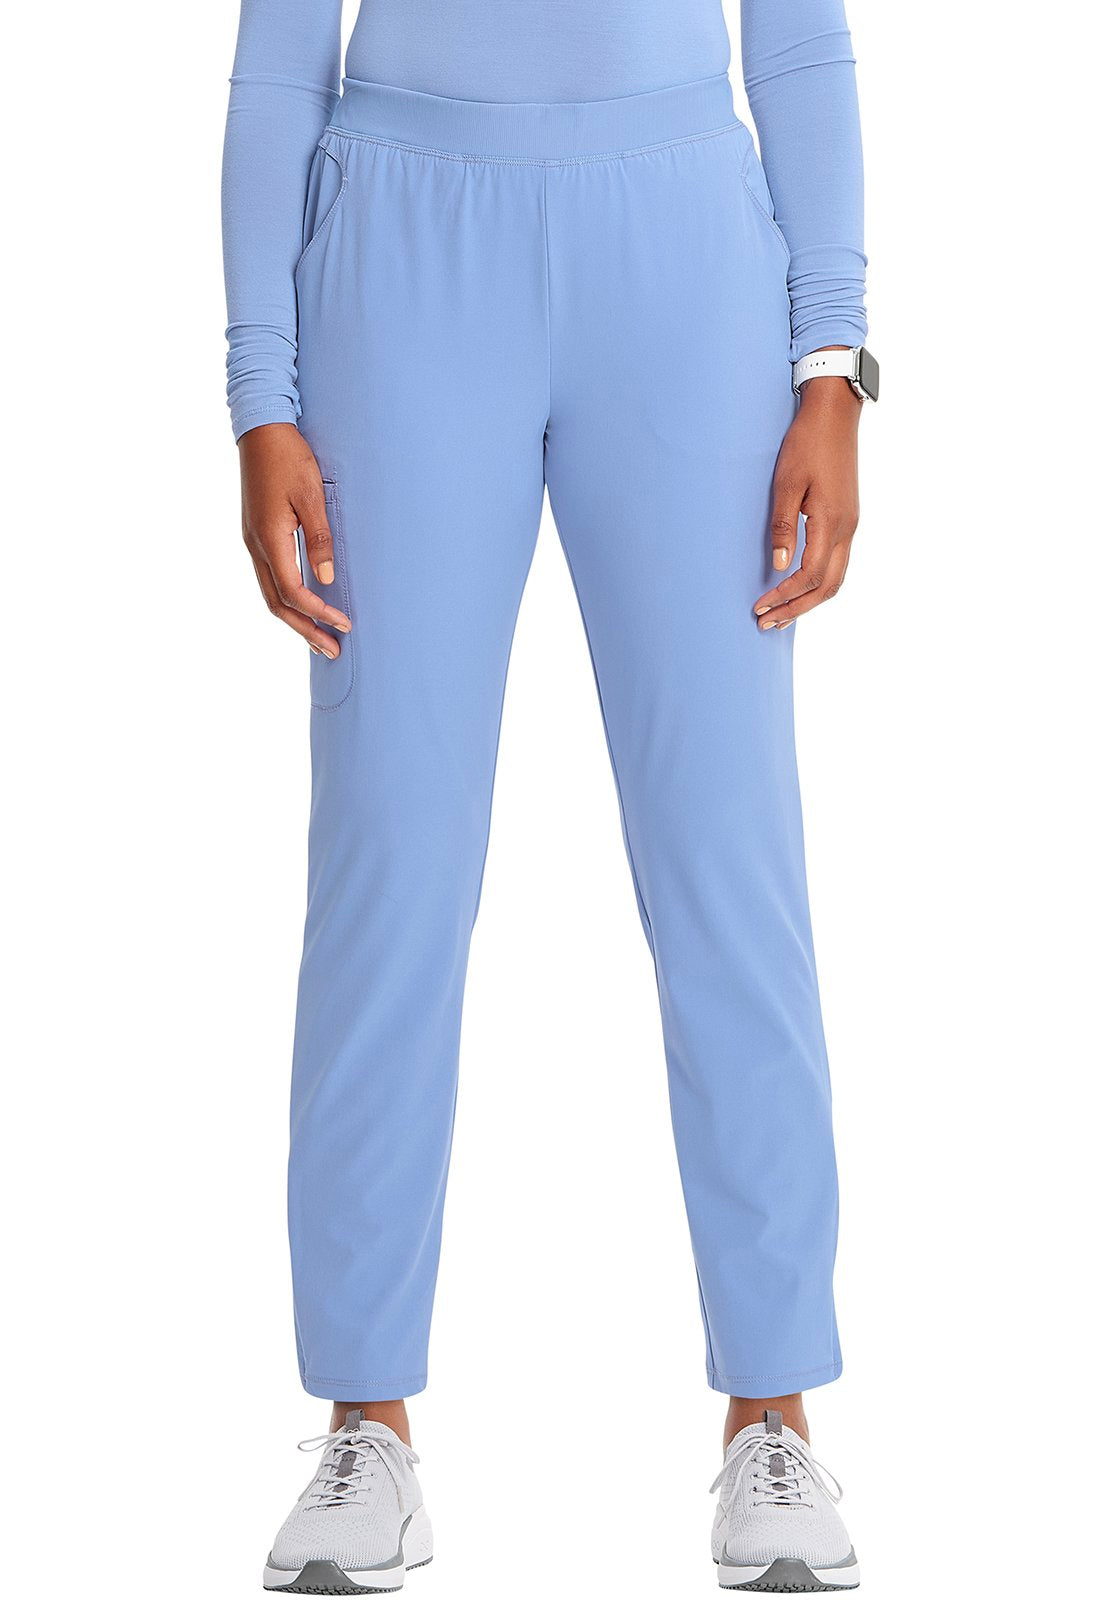 Infinity GNR8 Tall Mid-rise Tapered Leg Scrub Pant IN120AT